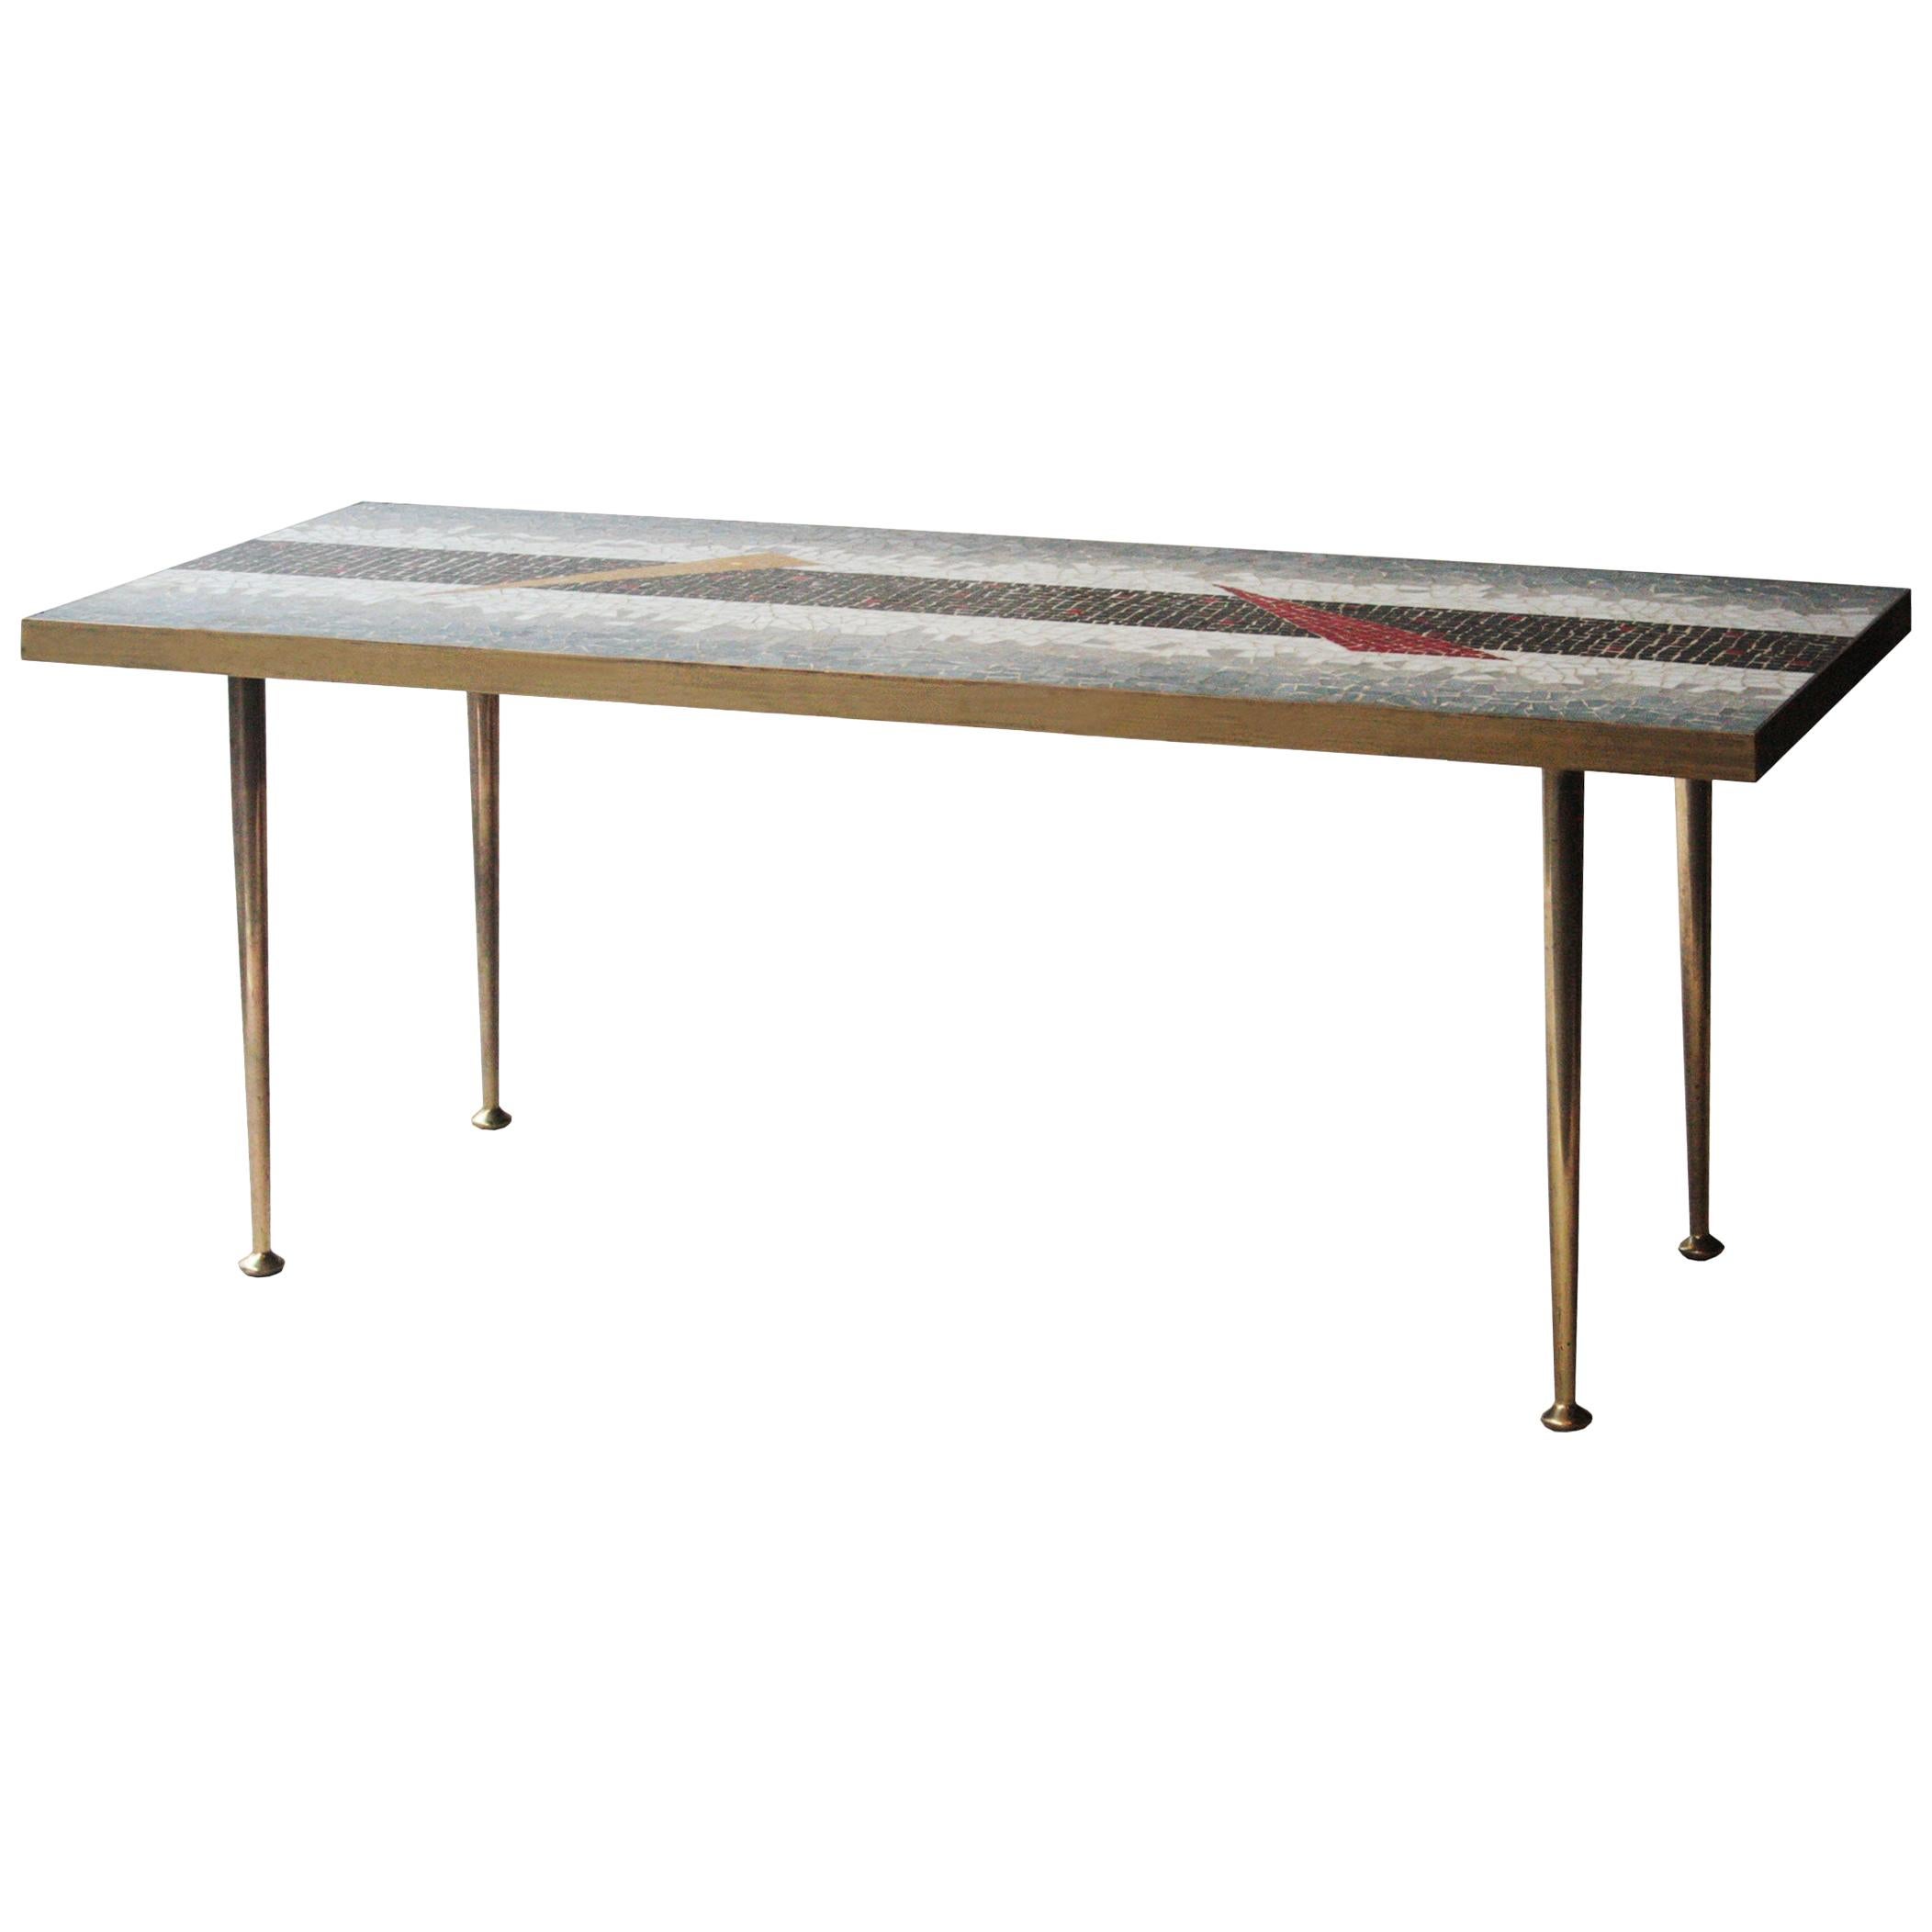 Midcentury Modern Brass Tiles Multicolored Coffee Table, Italy, 1950